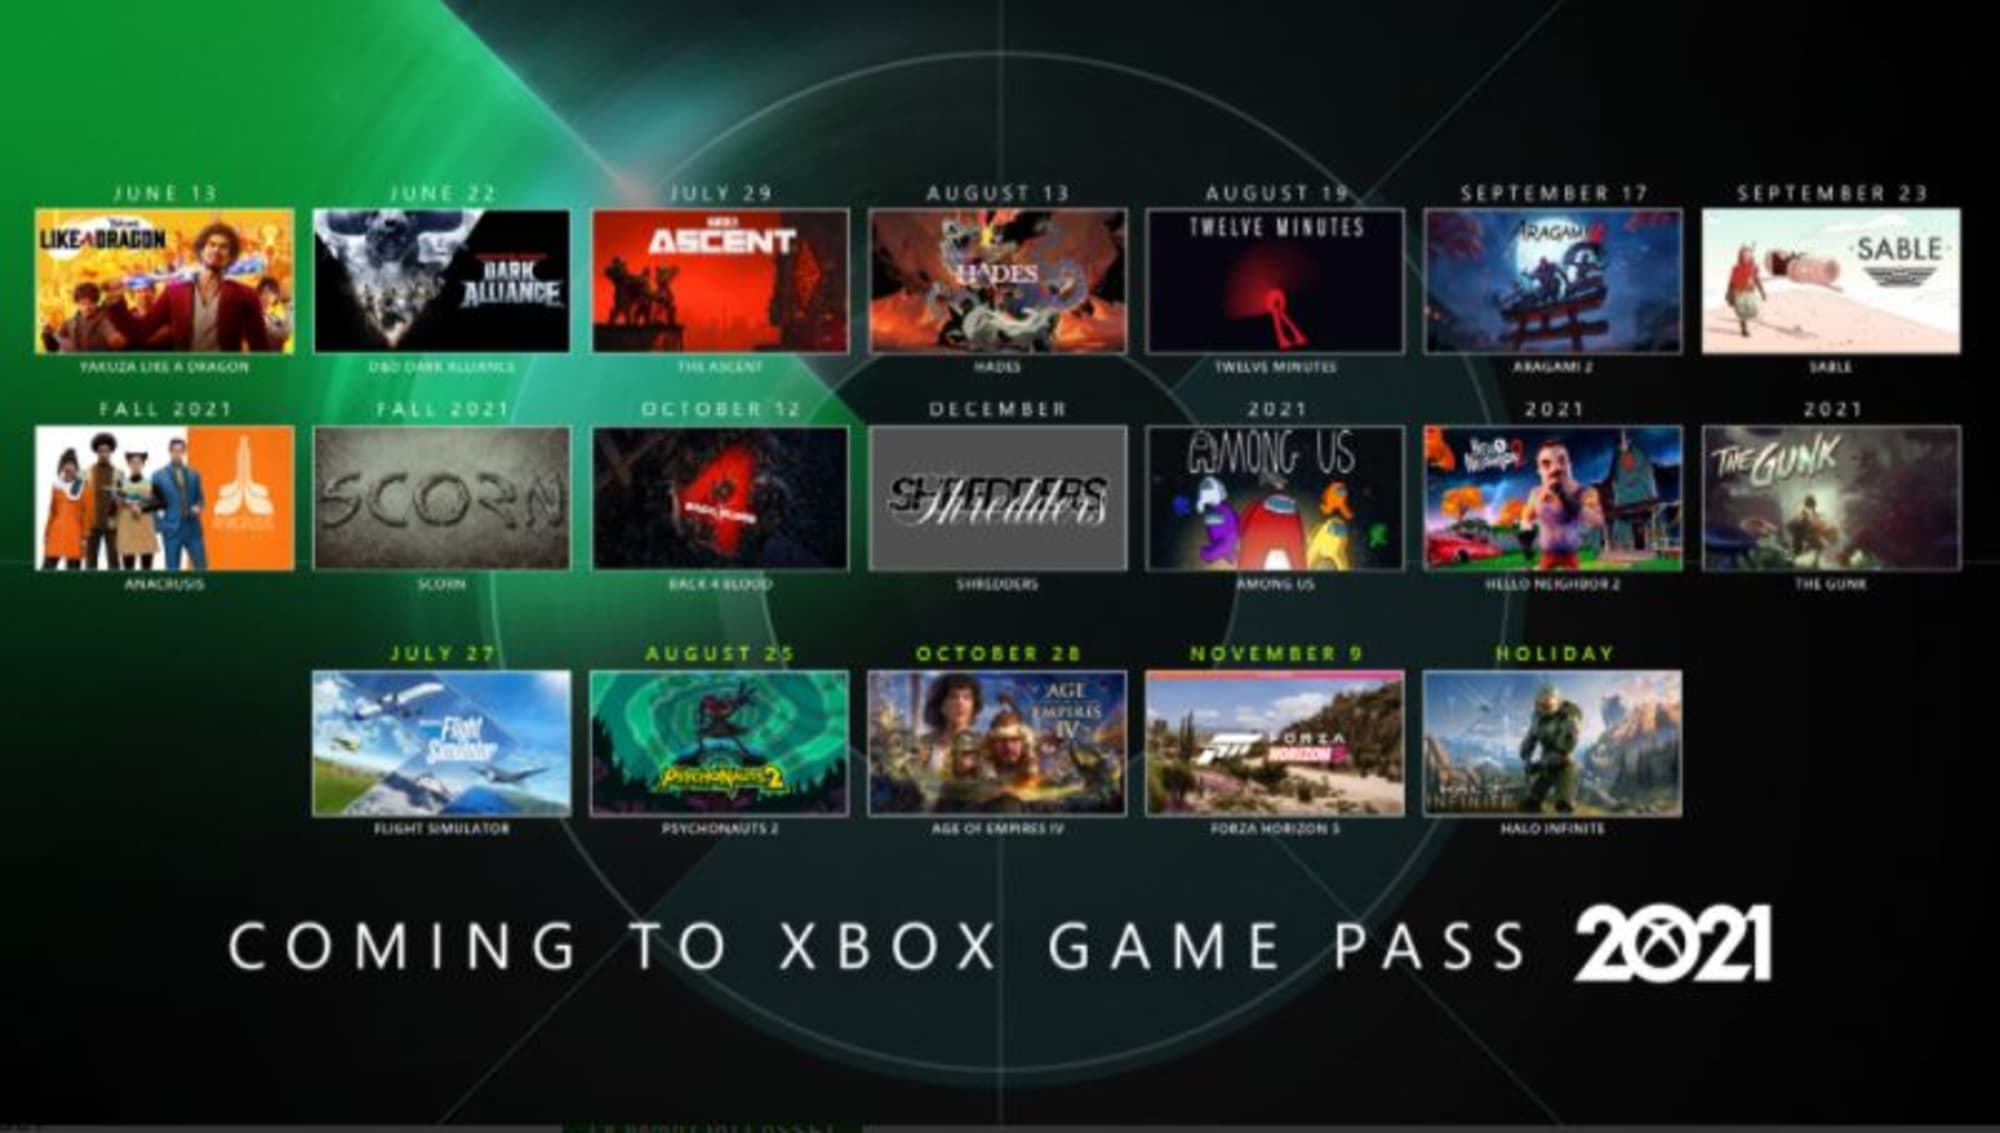 18 titles coming to Xbox Game Pass on Day One this year